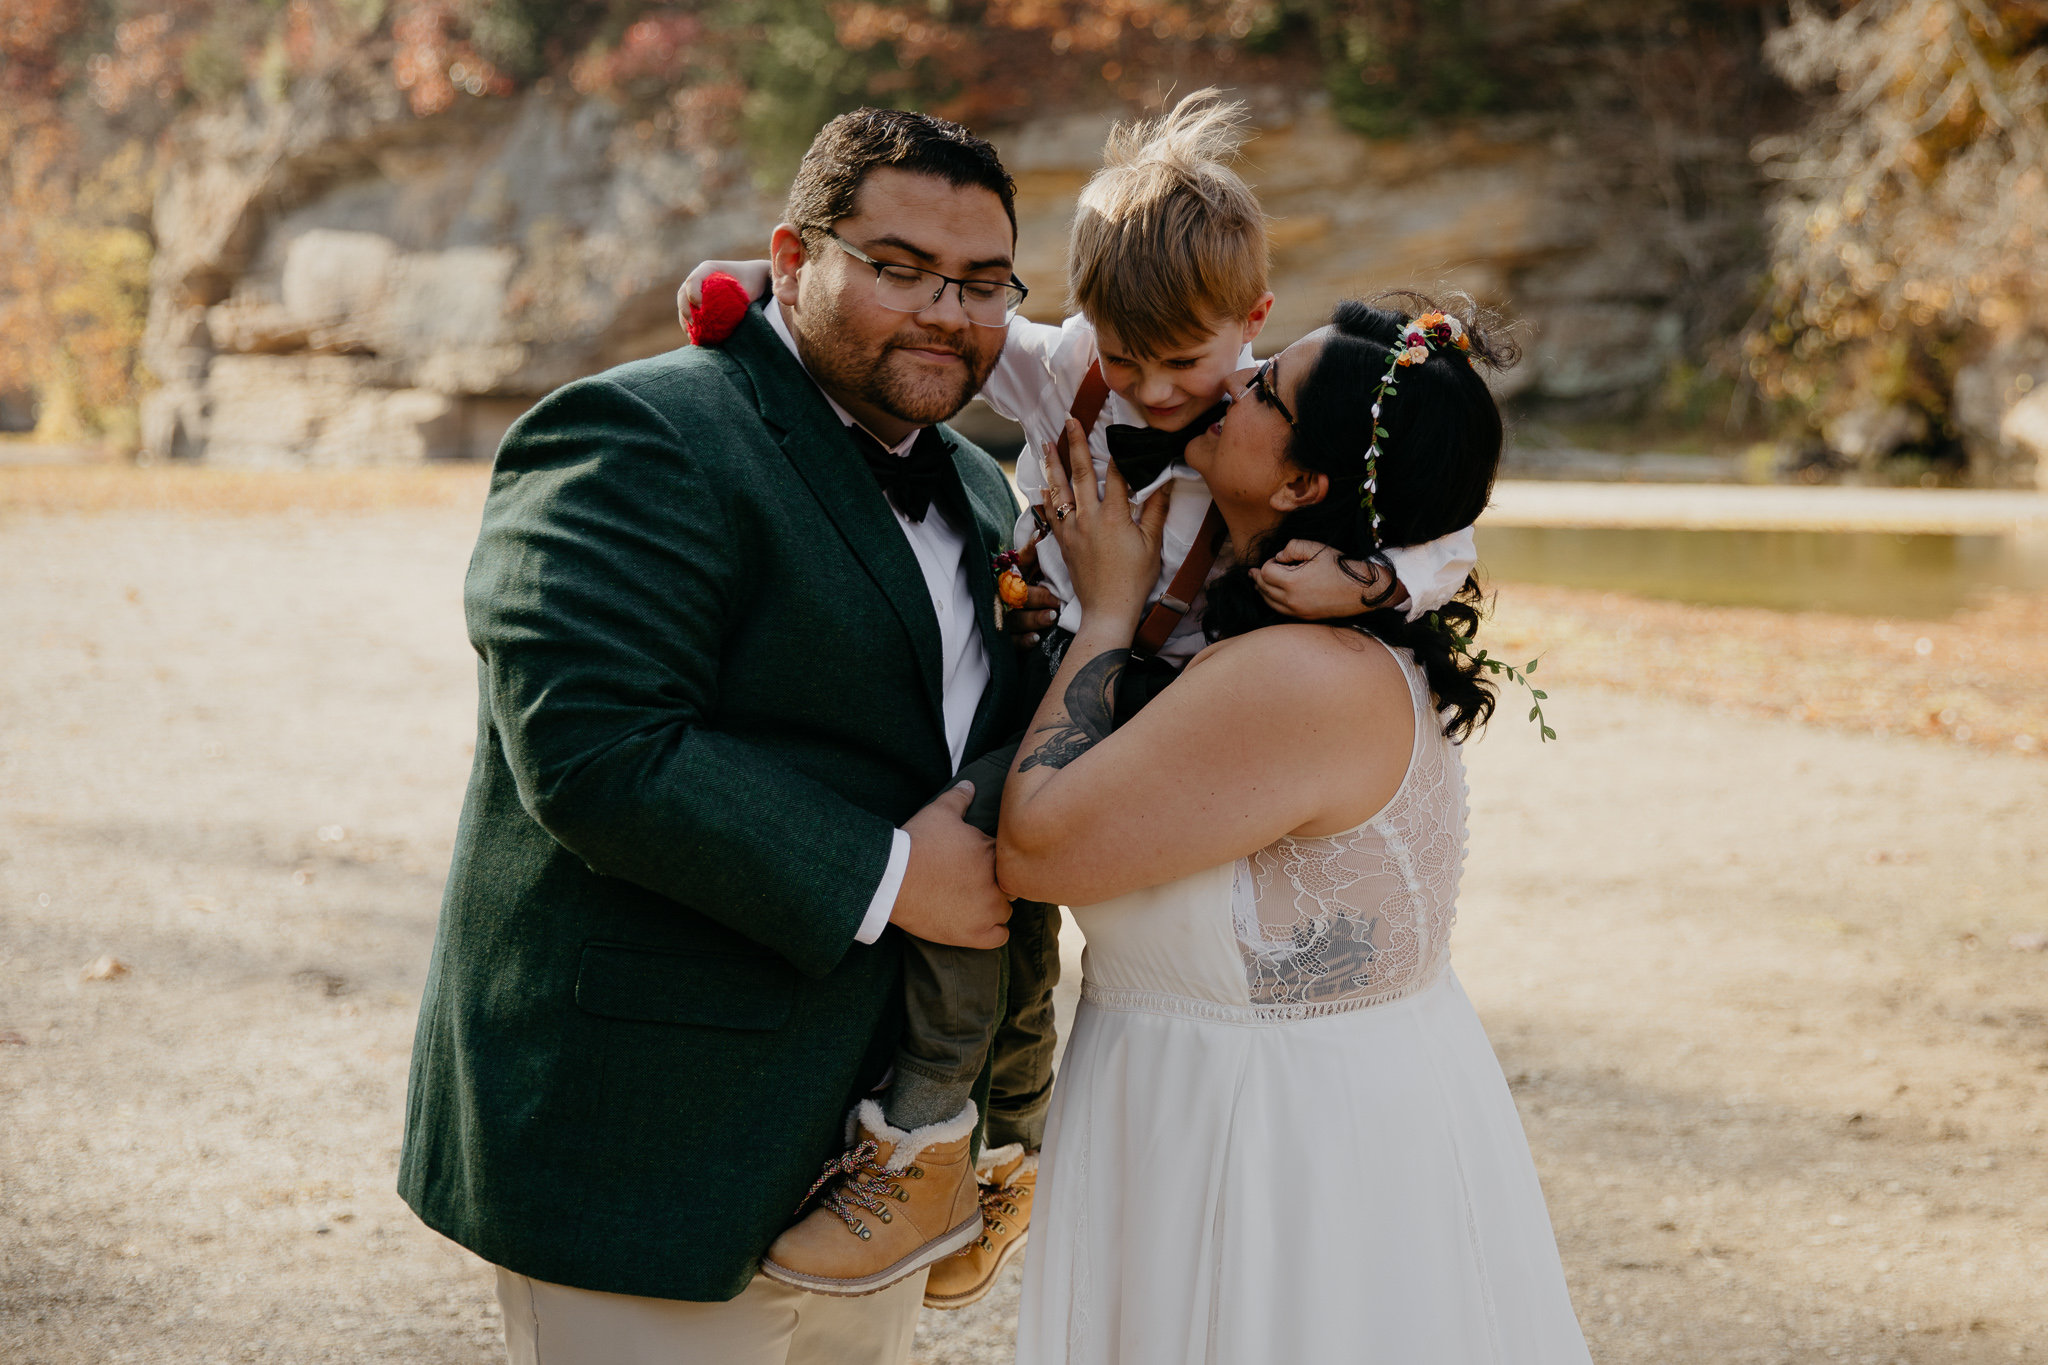 A groom and bride share a moment with their son after their intimate elopement ceremony at Turkey Run State Park